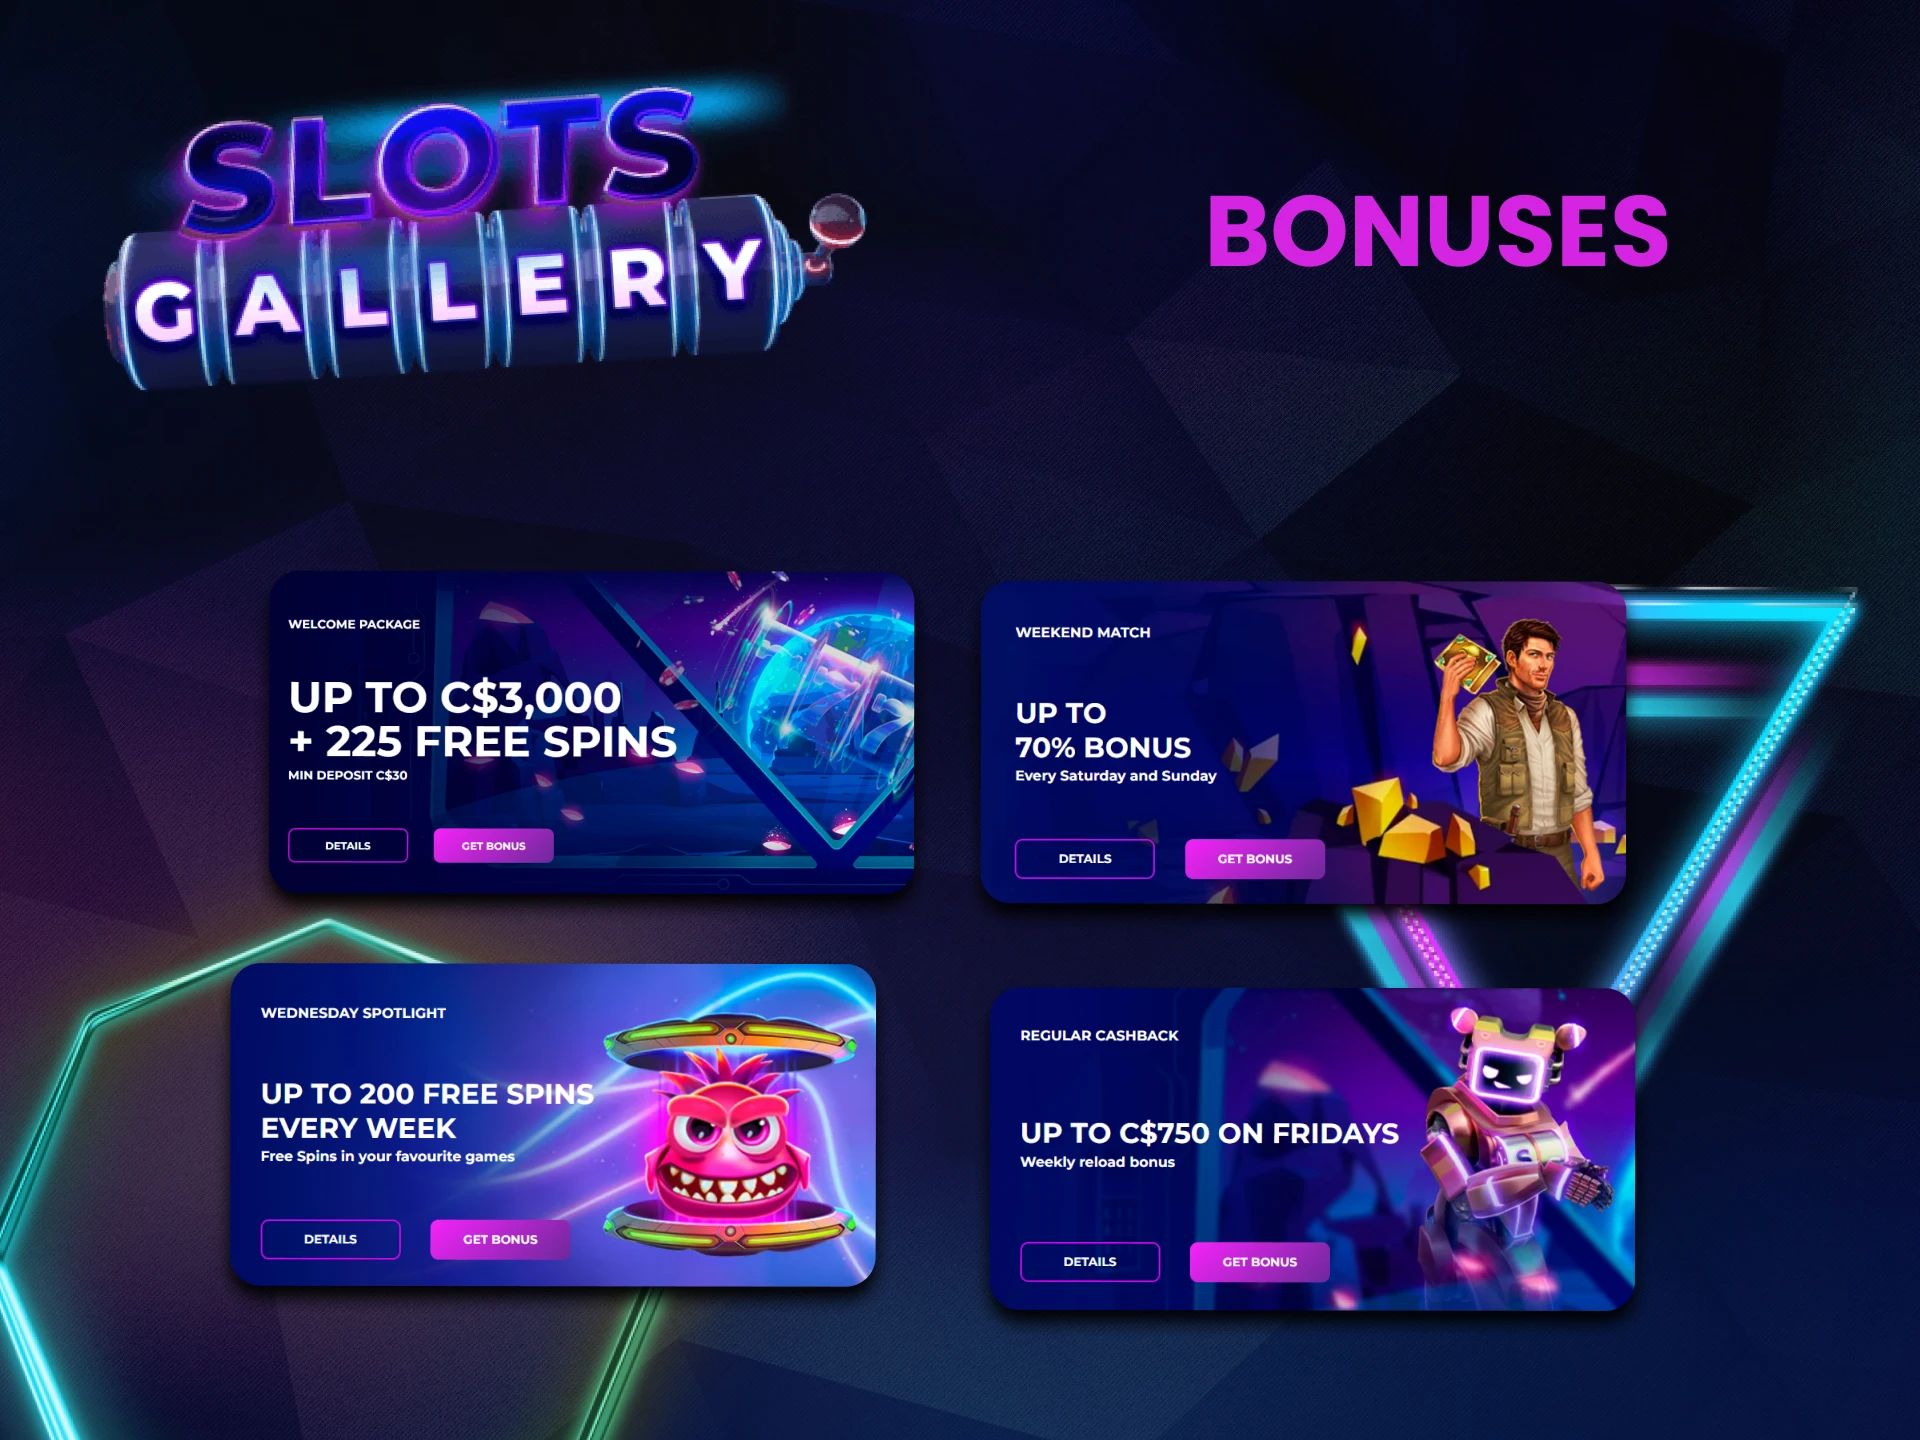 Get bonuses for crash games from Slots Gallery.